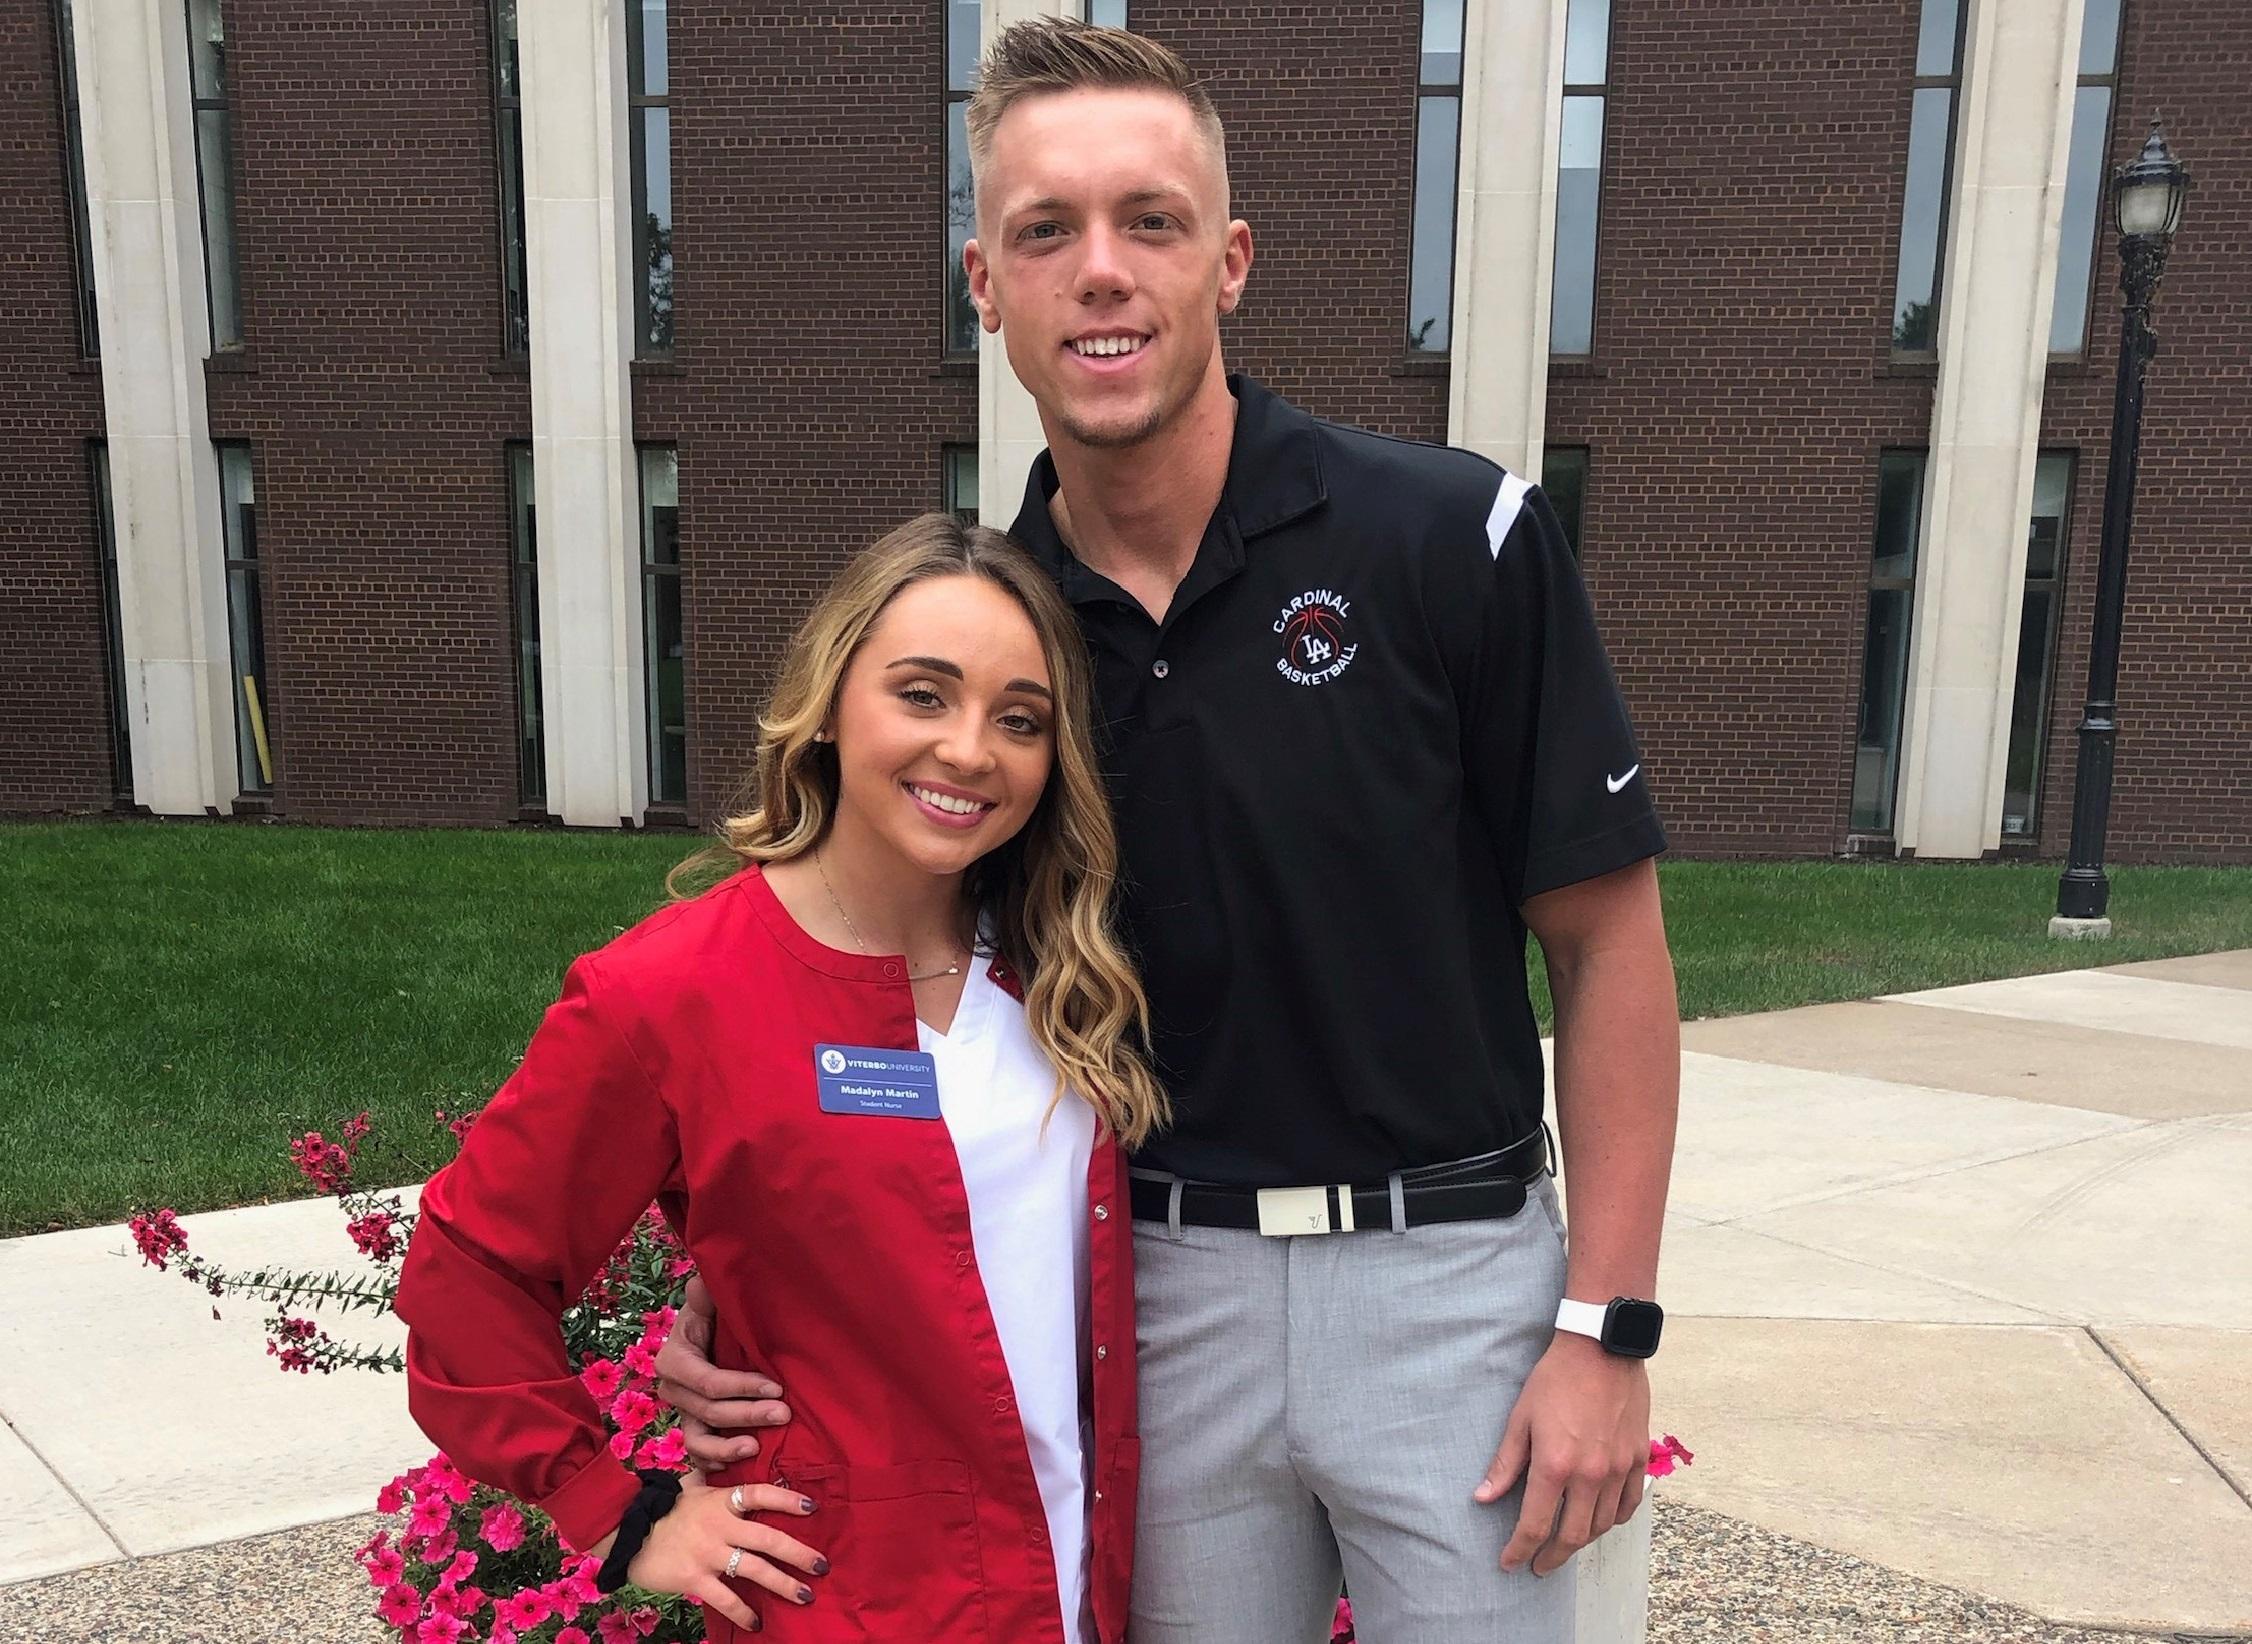 Cullin Neeck pictured with Viterbo nursing student Madalyn Martin.